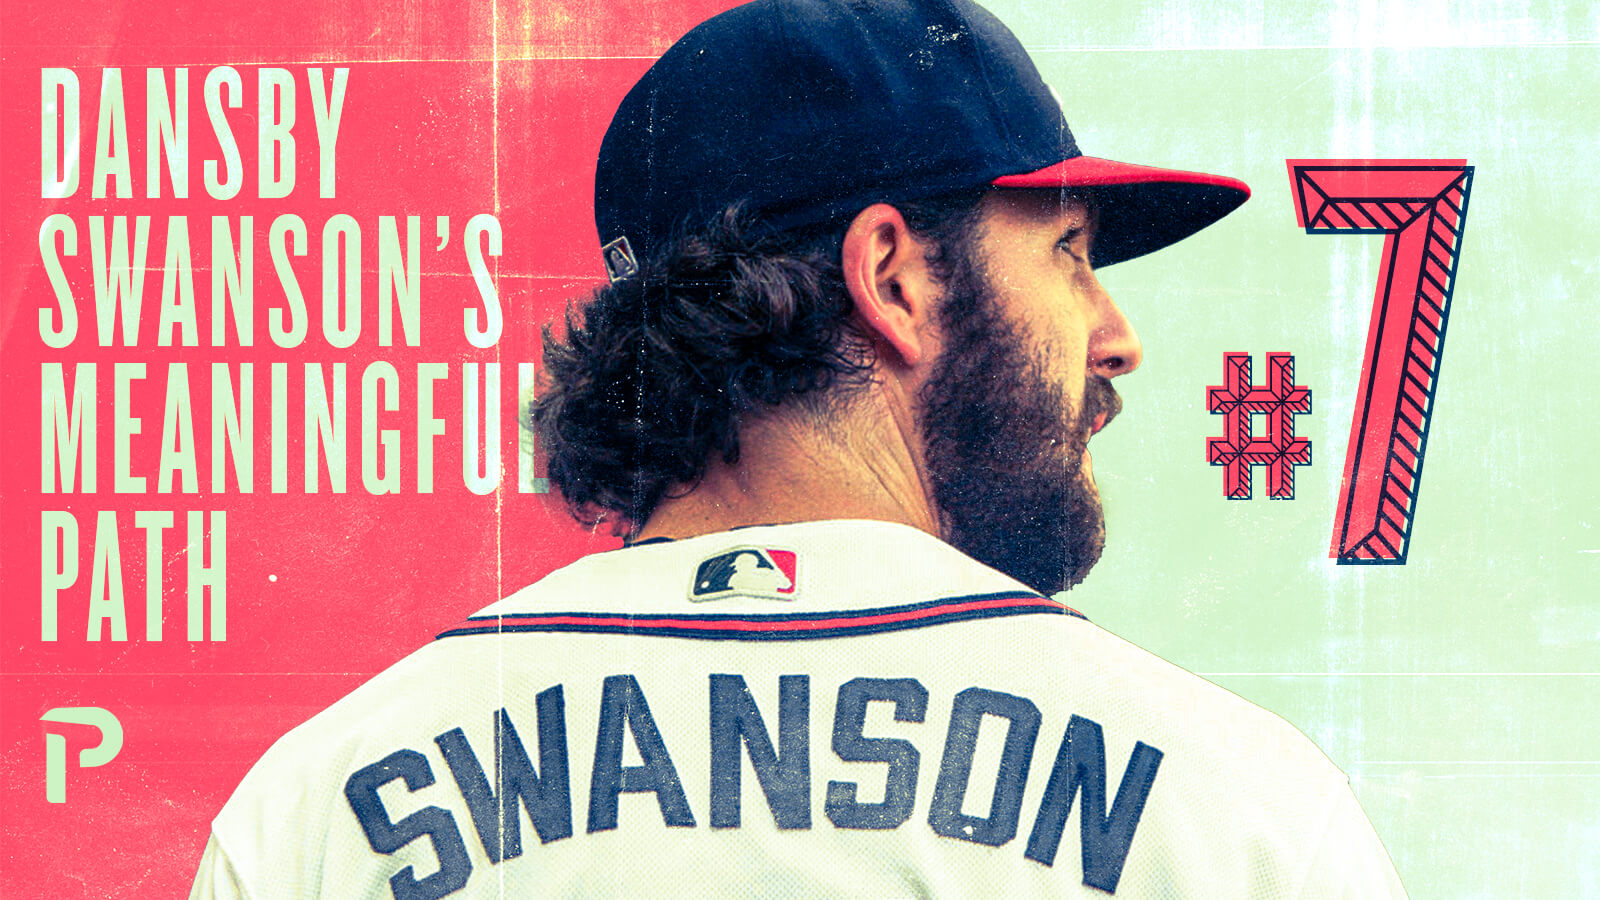 Some thoughts about Dansby Swanson's leadership skills, from